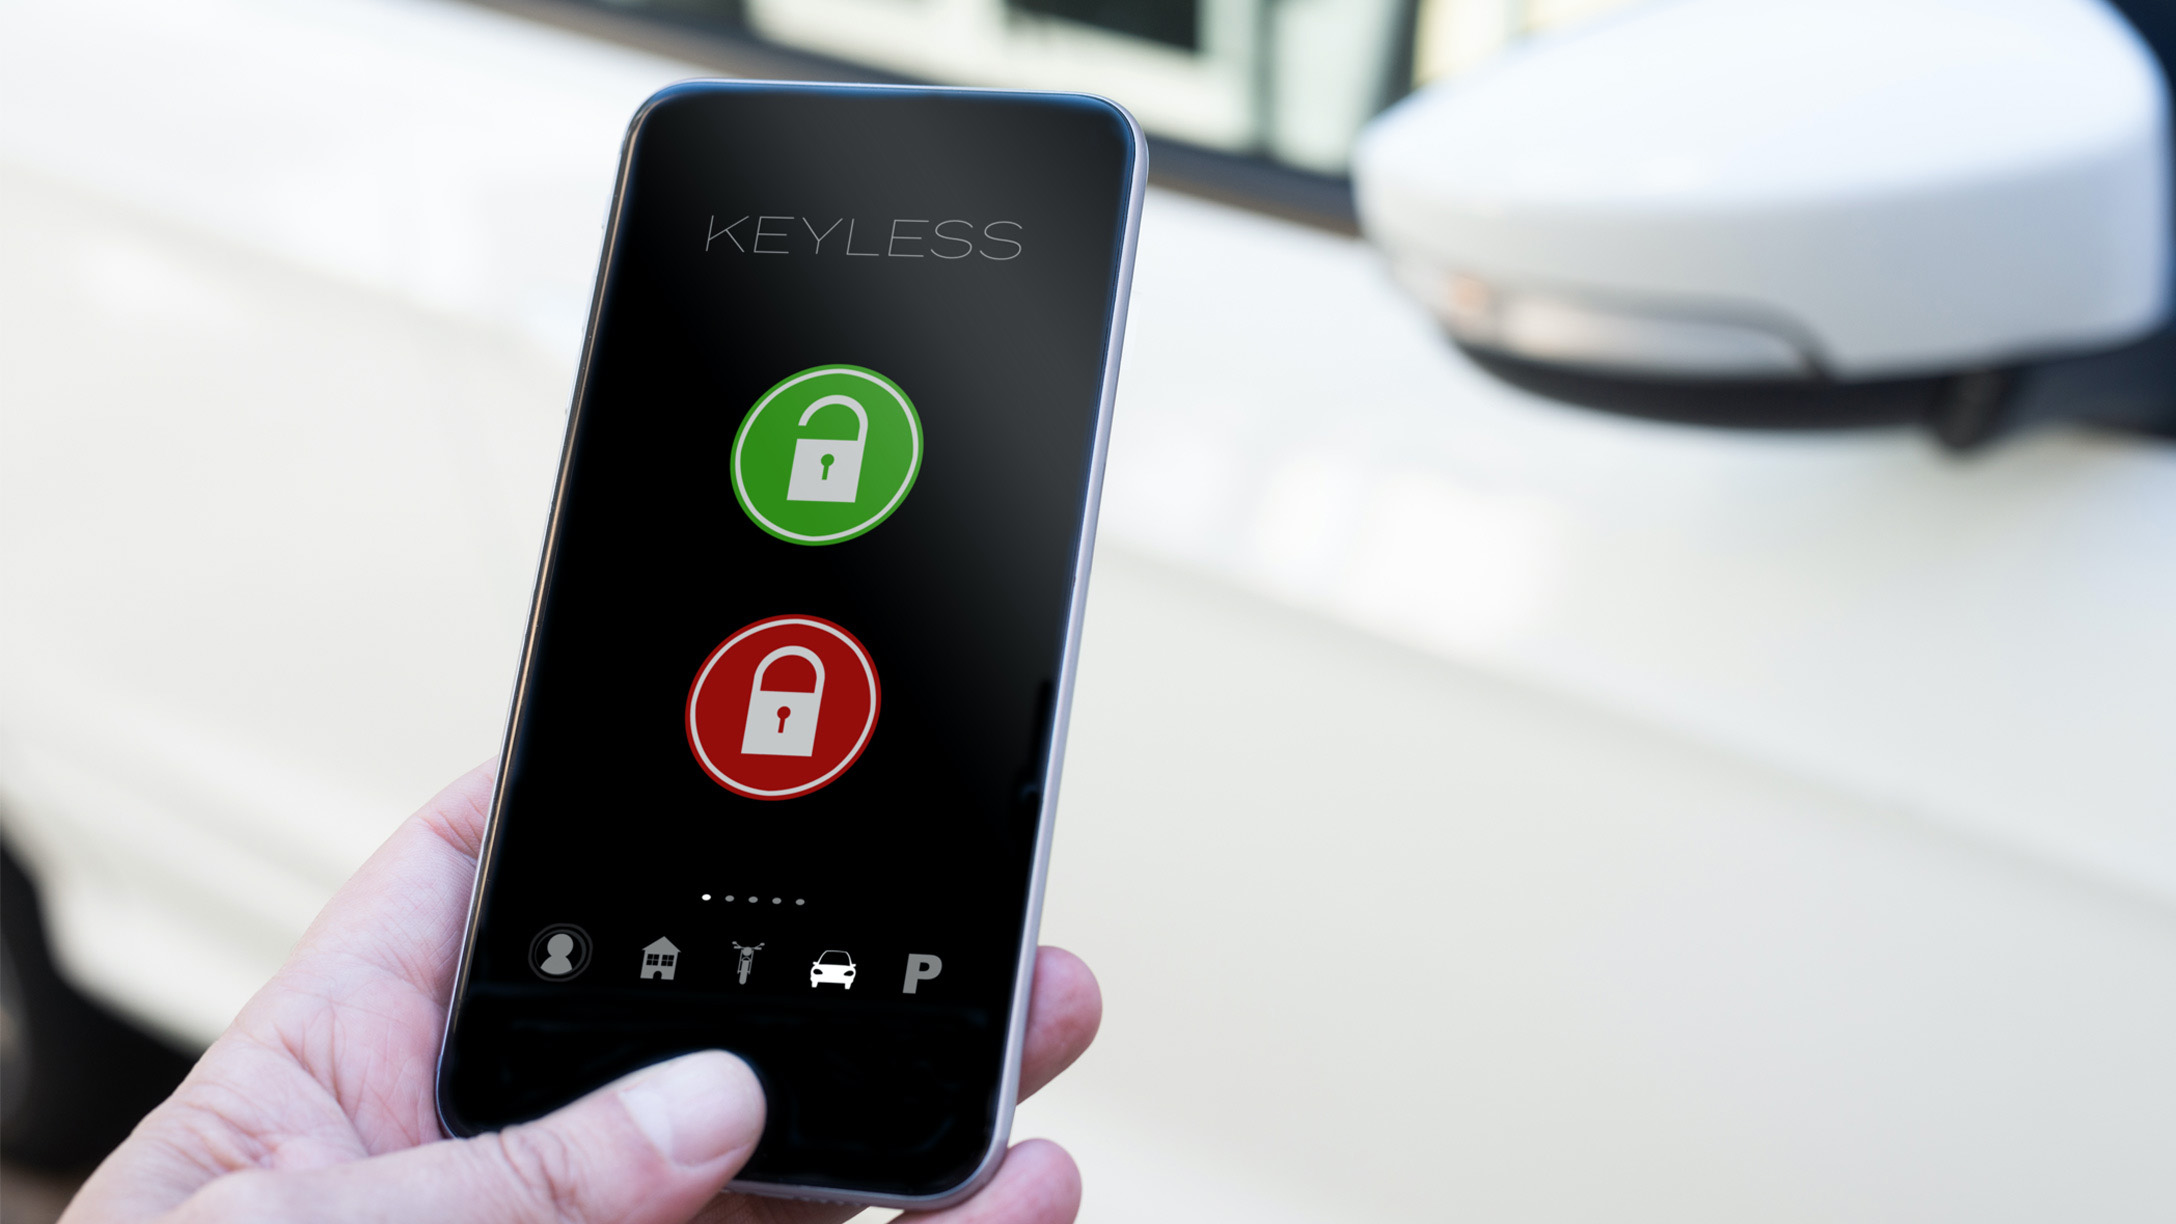 Hand holding a smartphone activating a keyless motorpooling solution